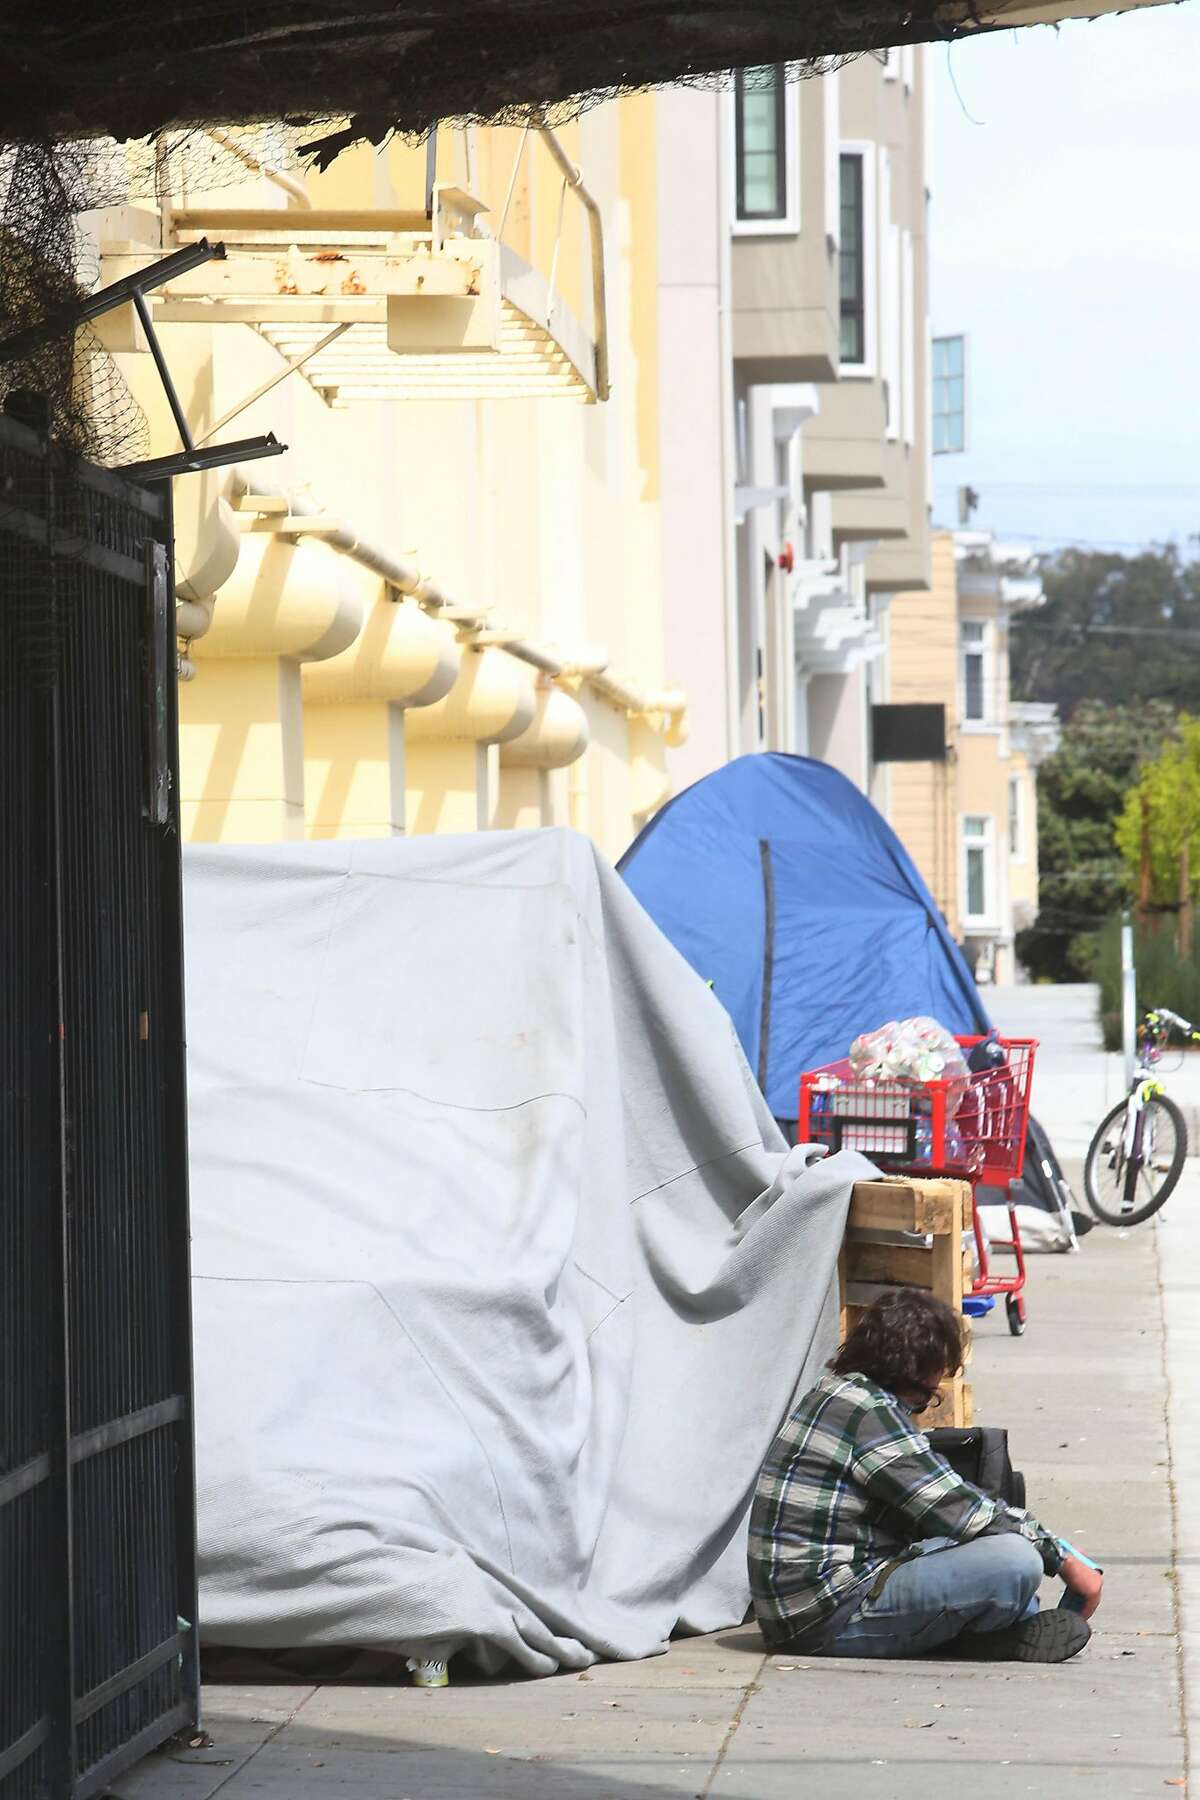 Luke Ellis of San Francisco sits on 18th Avenue next to tents and shelters as he rests while running an errand and visiting a friend on Thursday, April 9, 2020 in San Francisco, Calif. Ellis said he is not homeless but was visiting a friend.